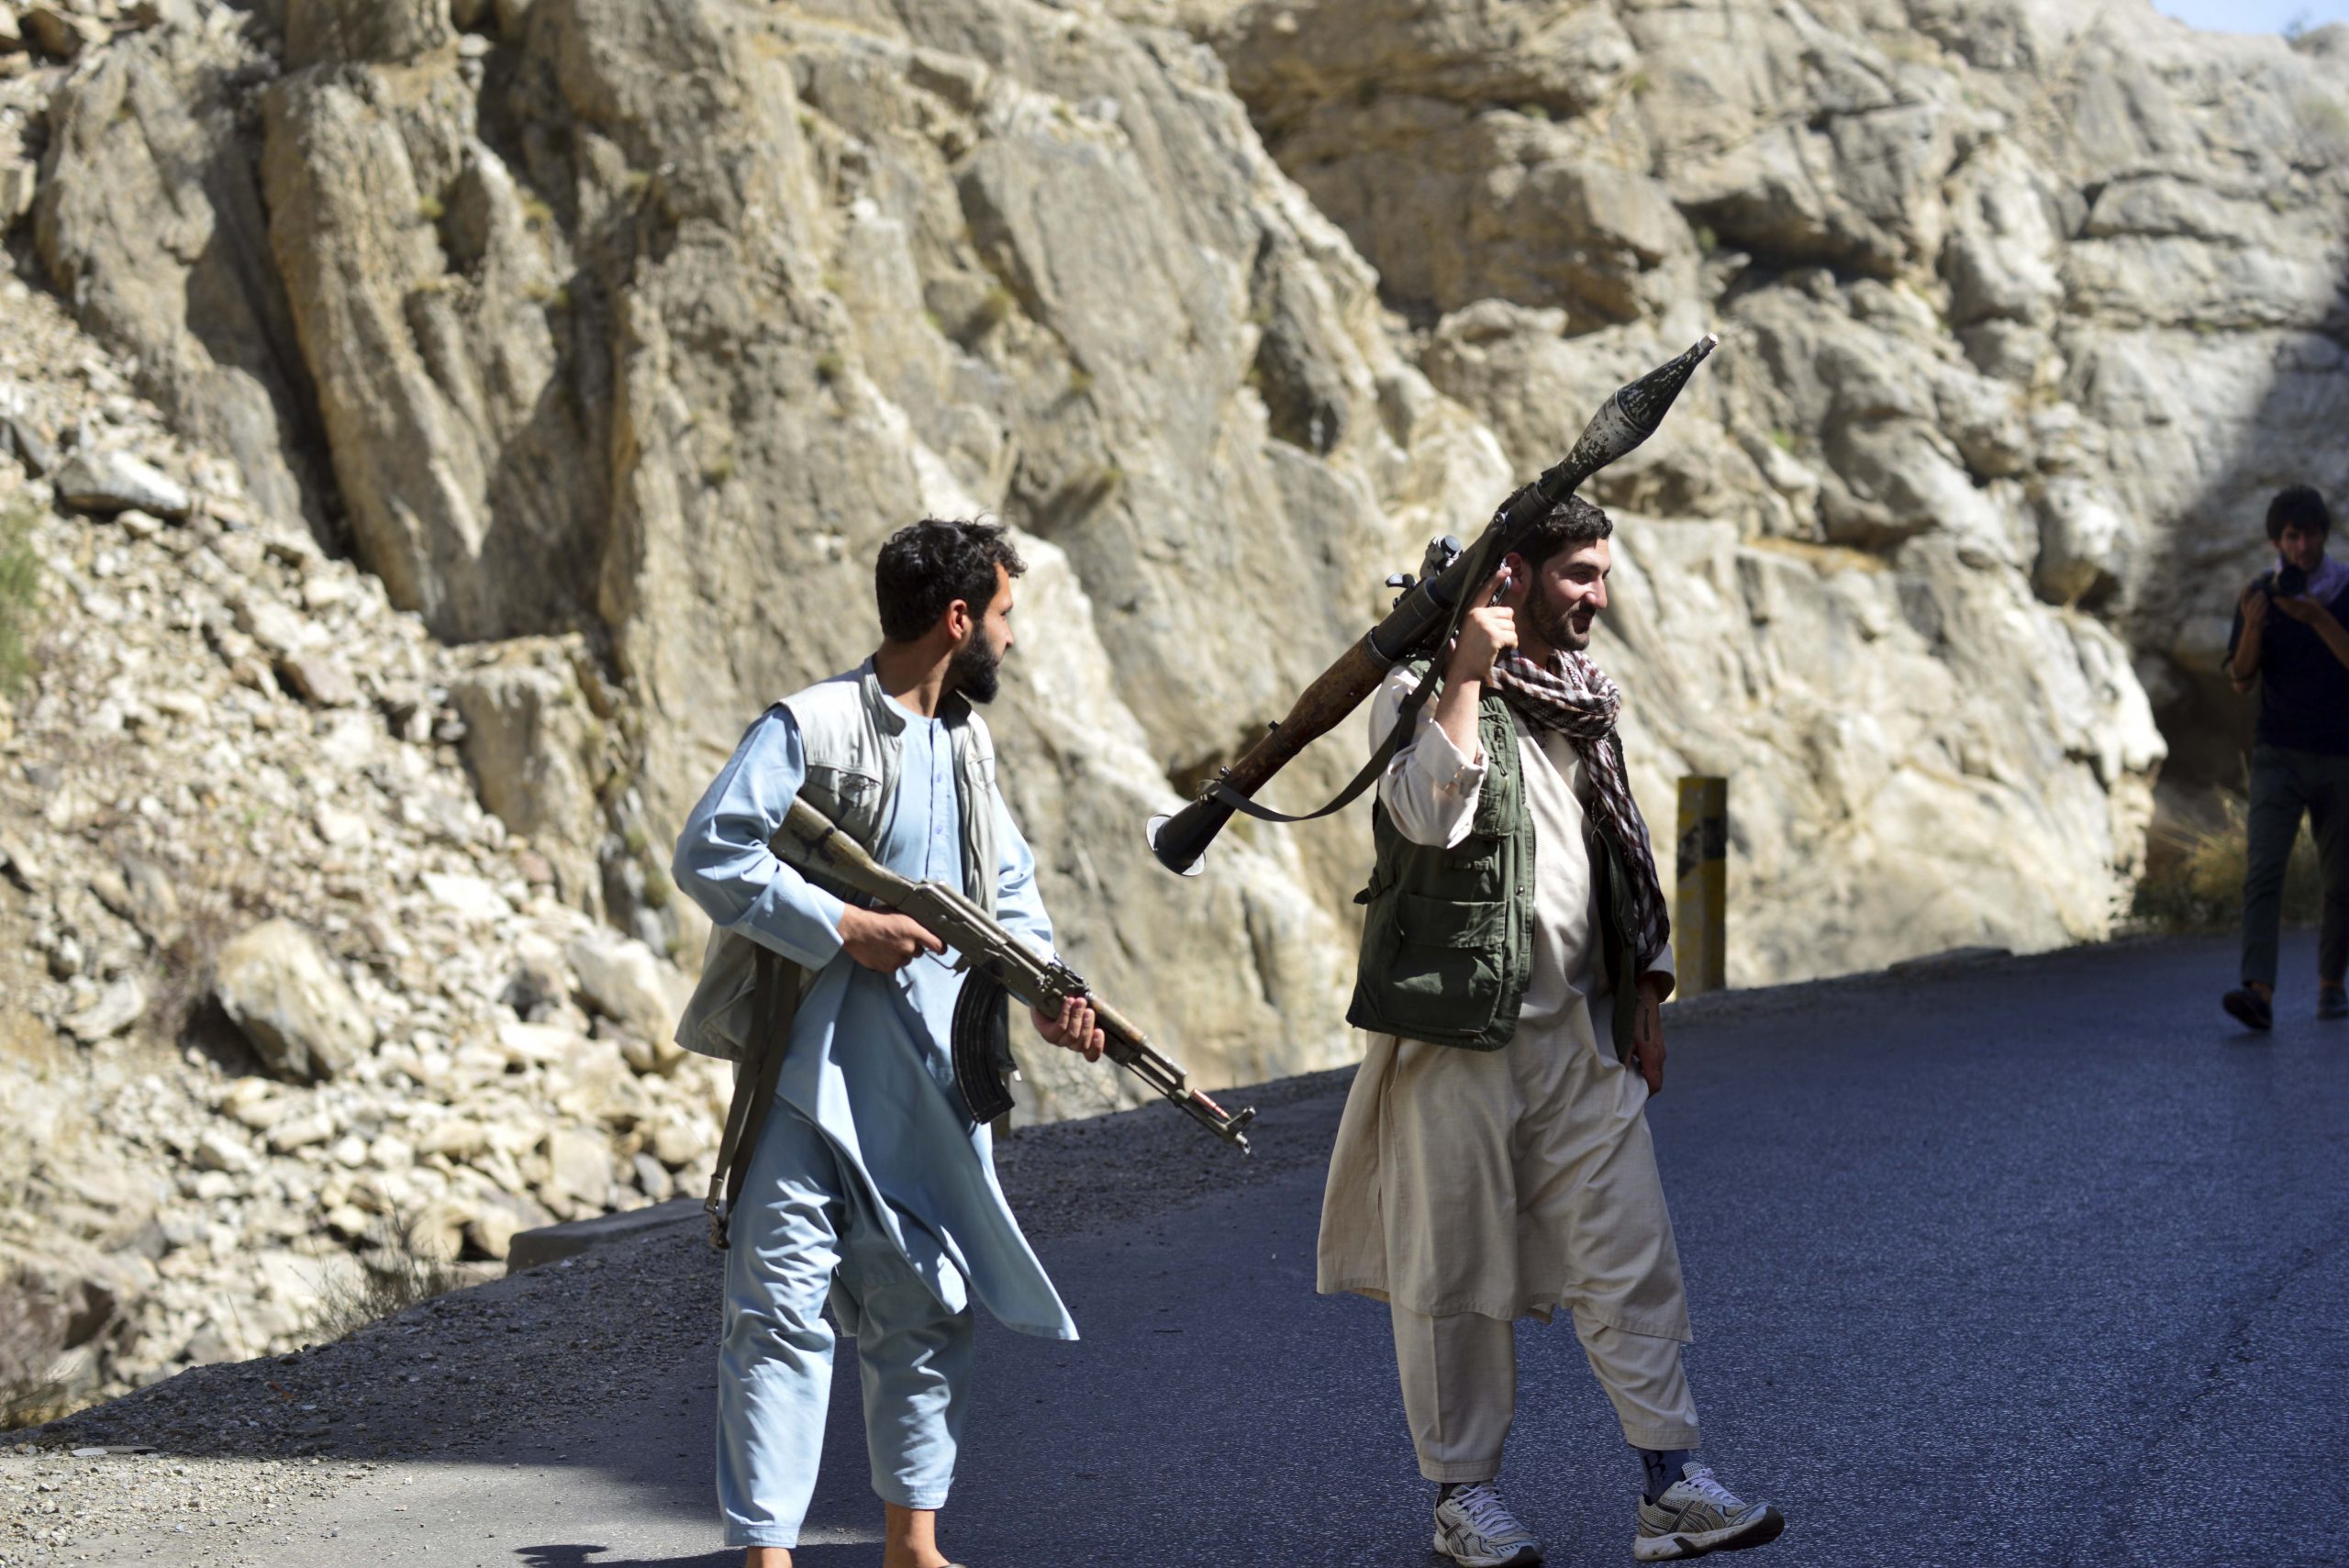 Taliban invite China, others to attend government formation ceremony: Report